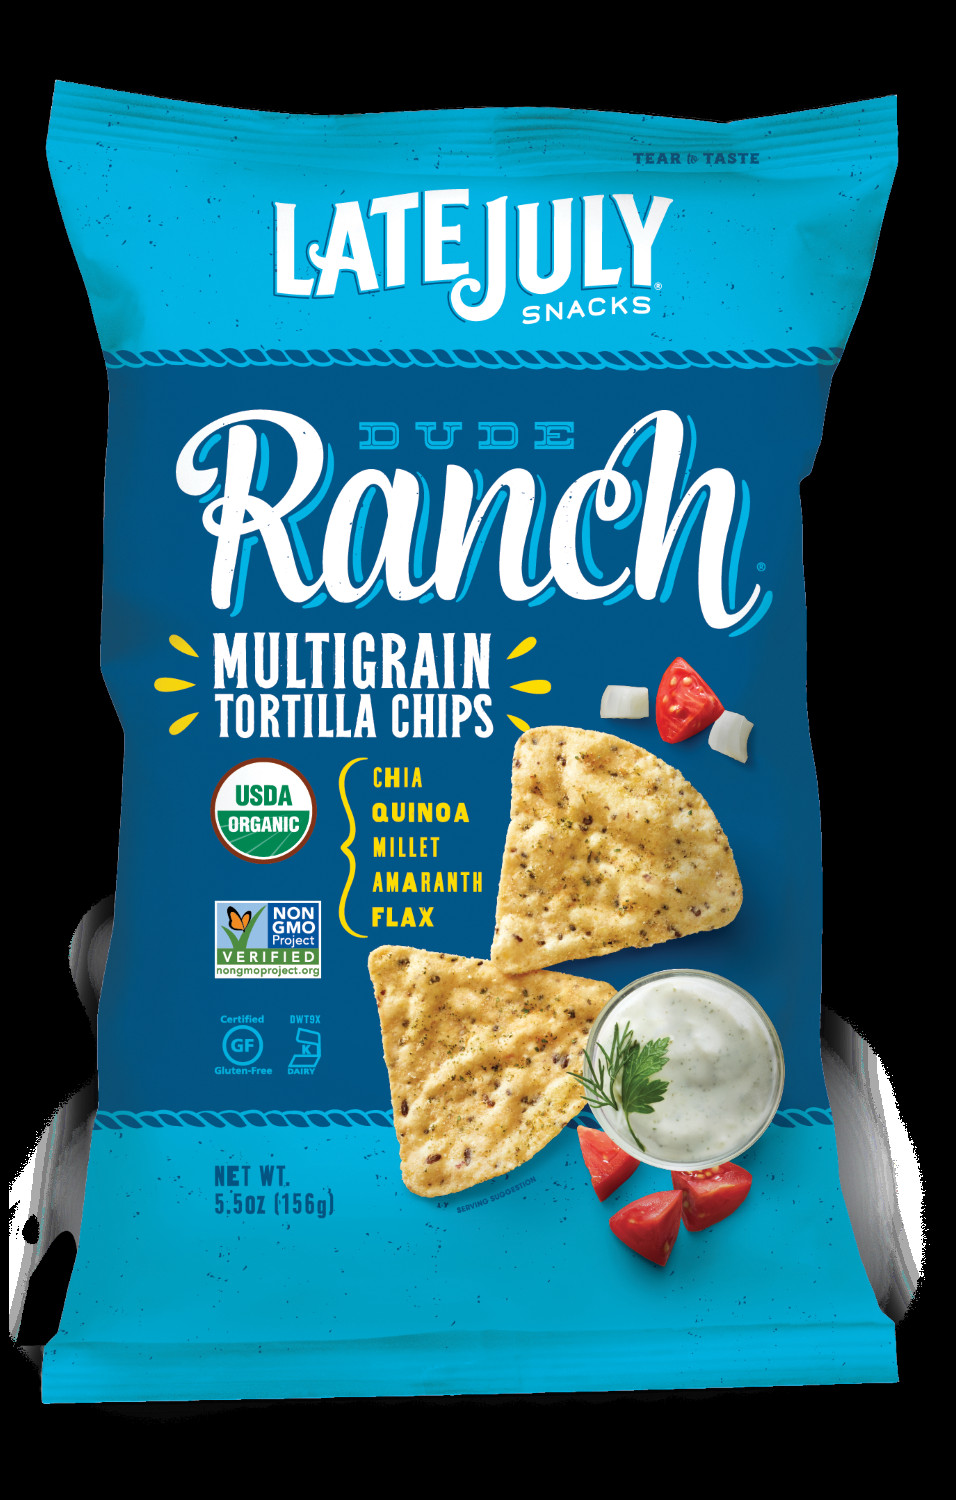 Late July Crackers
 Late July Snacks Multigrain Tortilla Chips Dude Ranch 5